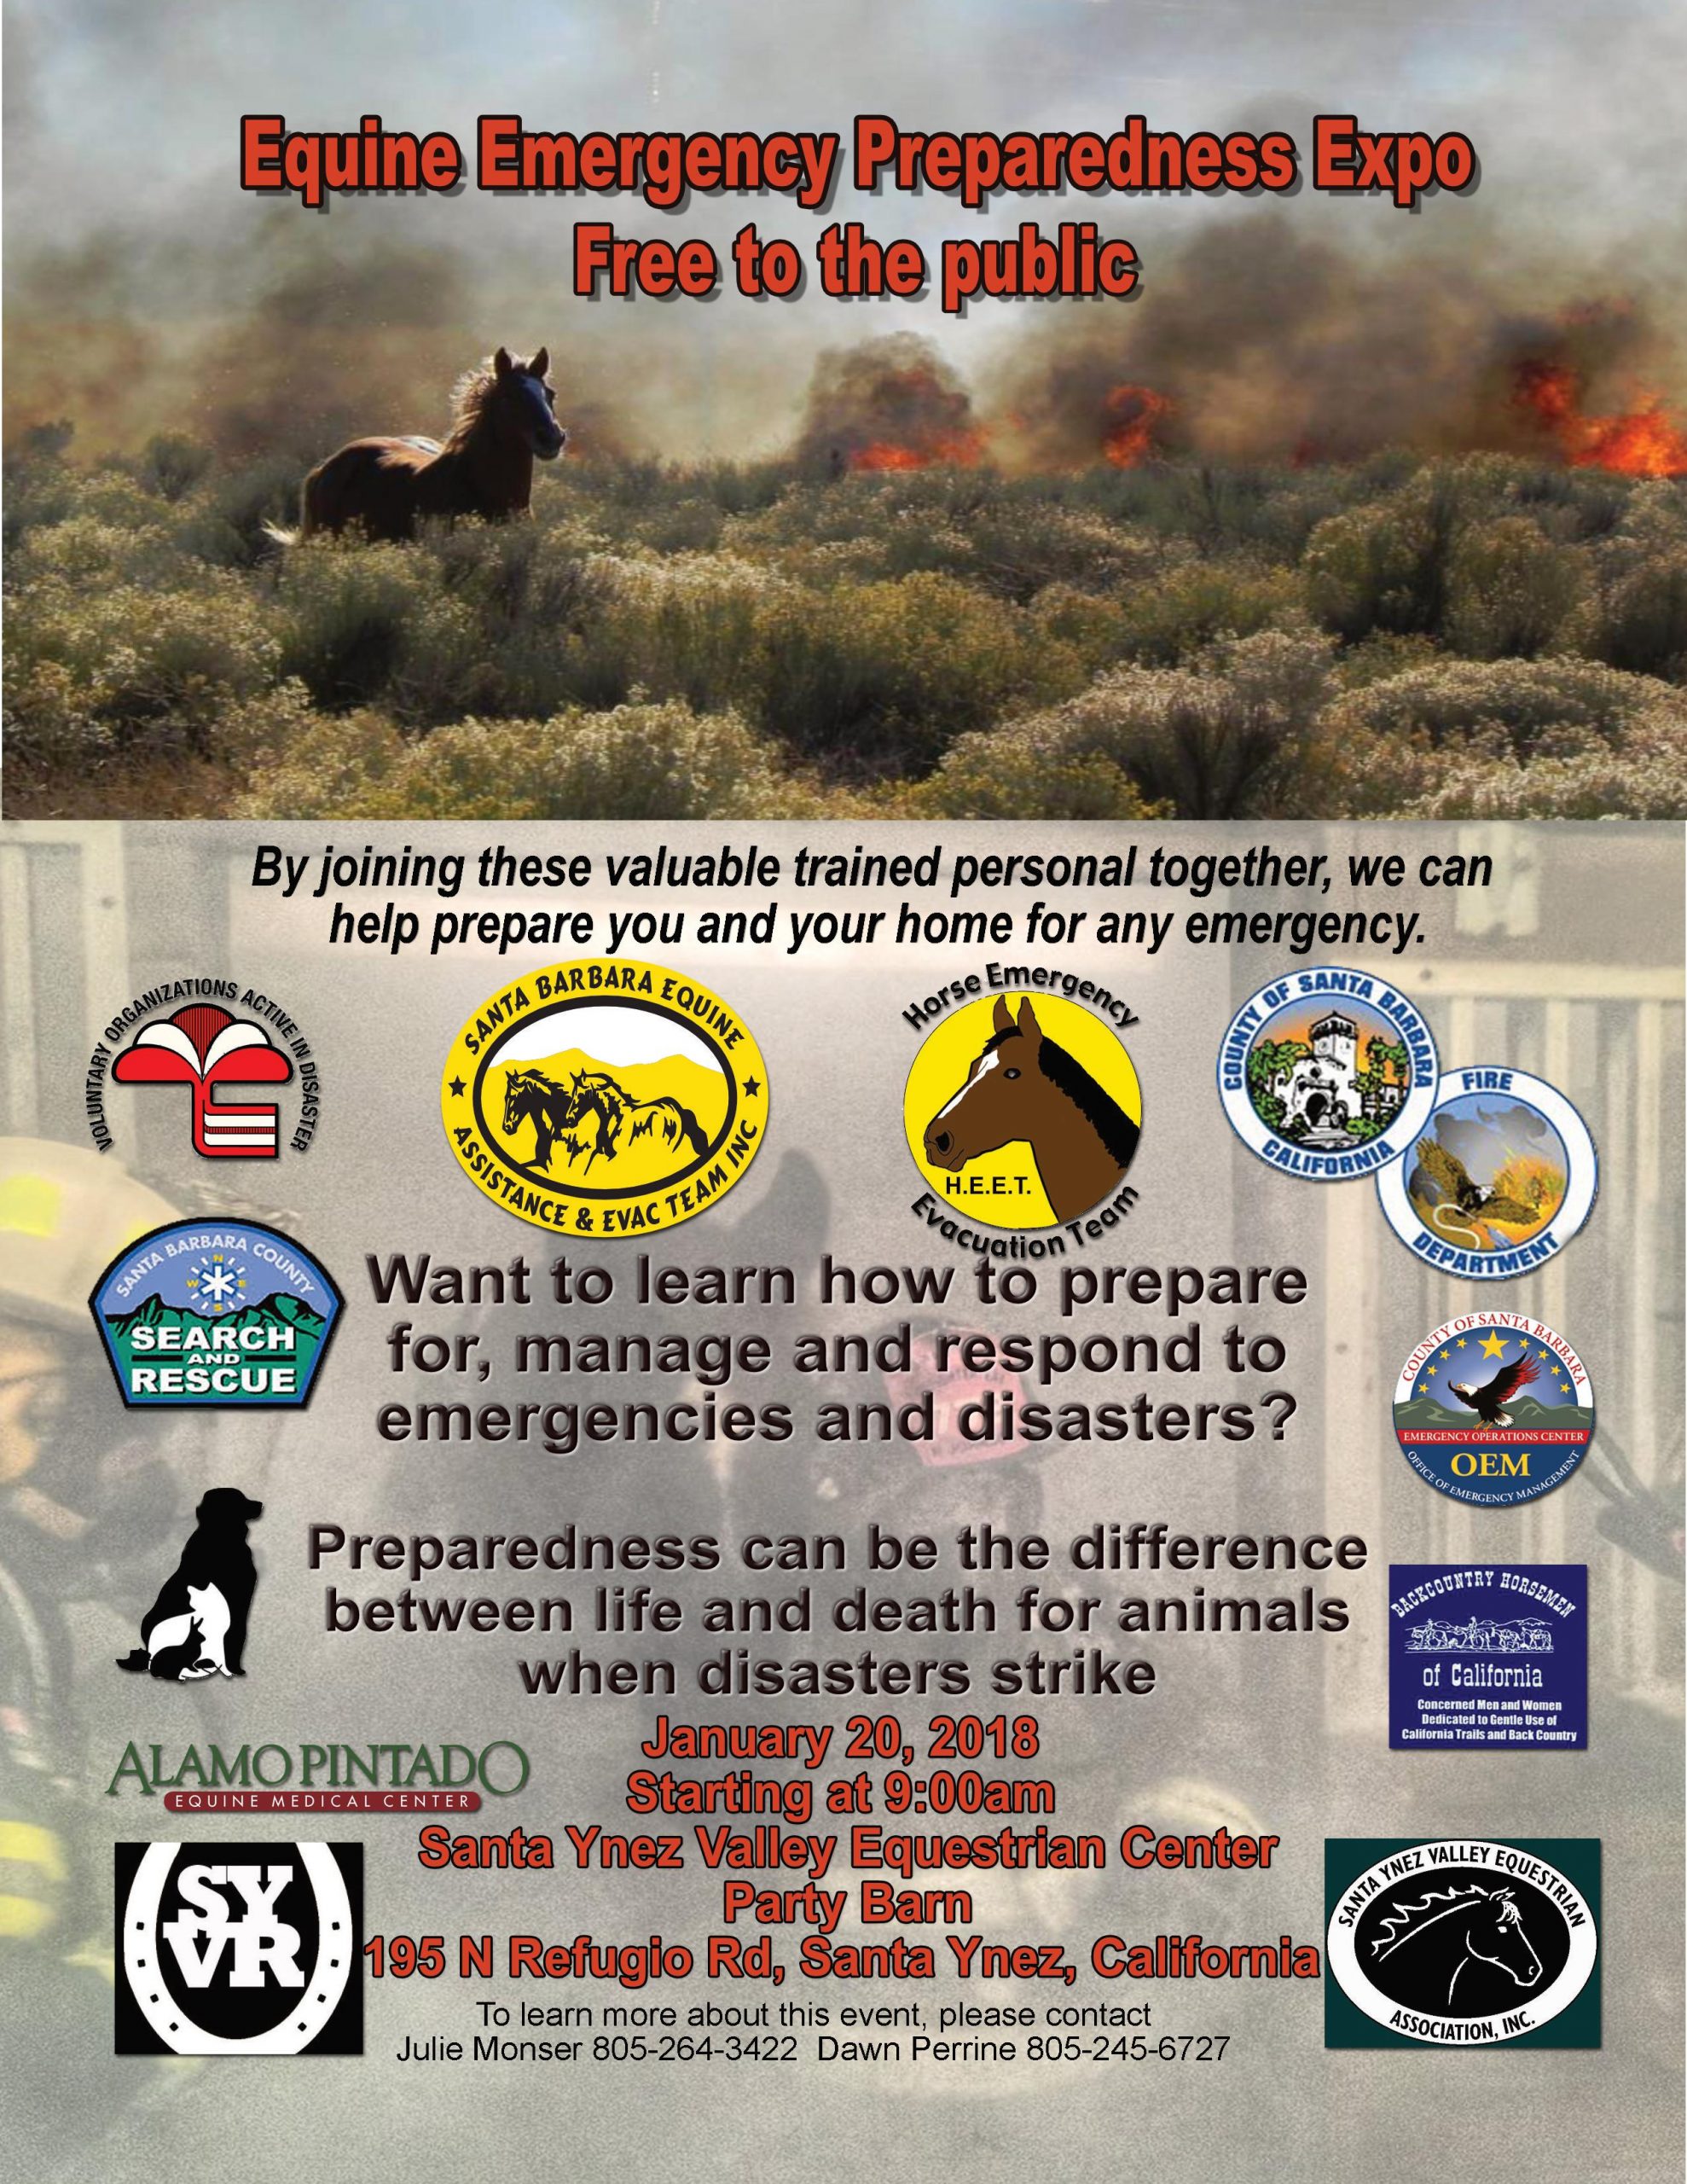 Learn How to Save Your Horse at the Equine Emergency Preparedness Expo | SLO Horse News